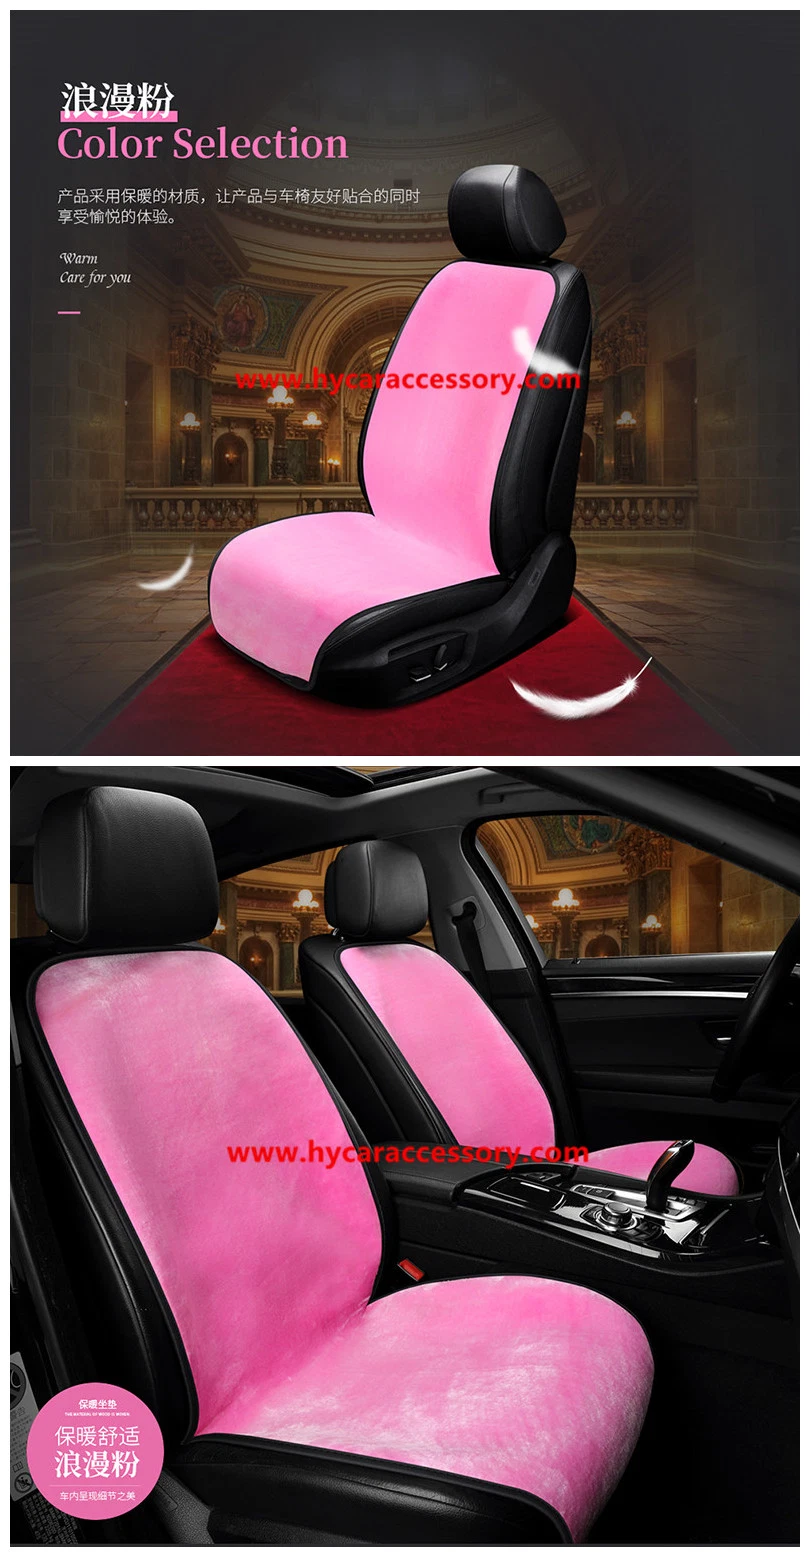 Car Decoration Car Interiorcar Accessory Universal 12V Wine Red Heating Cushion Pad Winter Auto Heated Car Seat Cover for All Vehicle